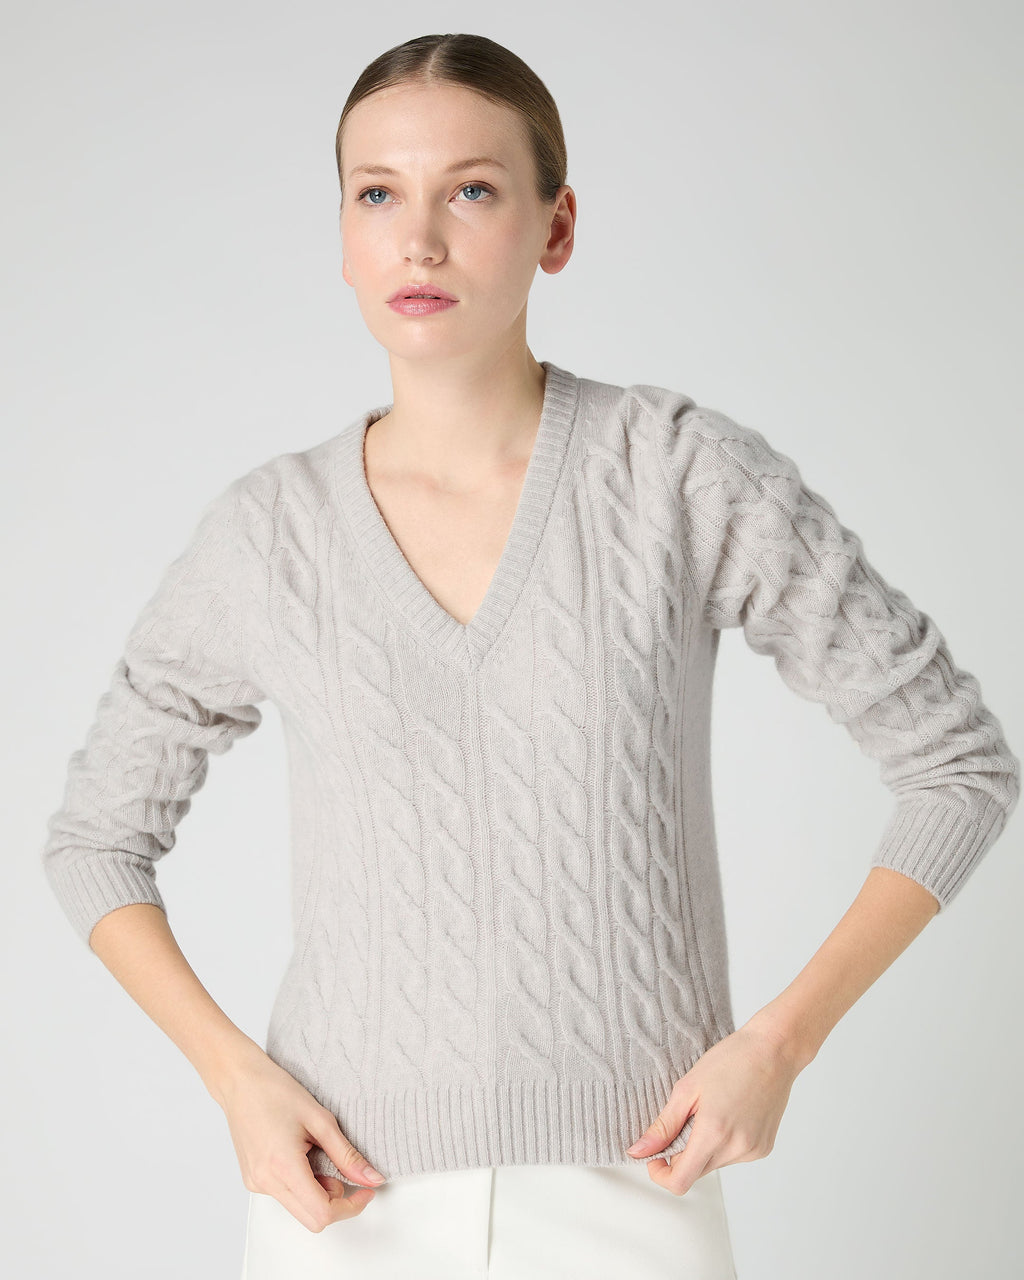 Women's Cable Cashmere, Complimentary Delivery